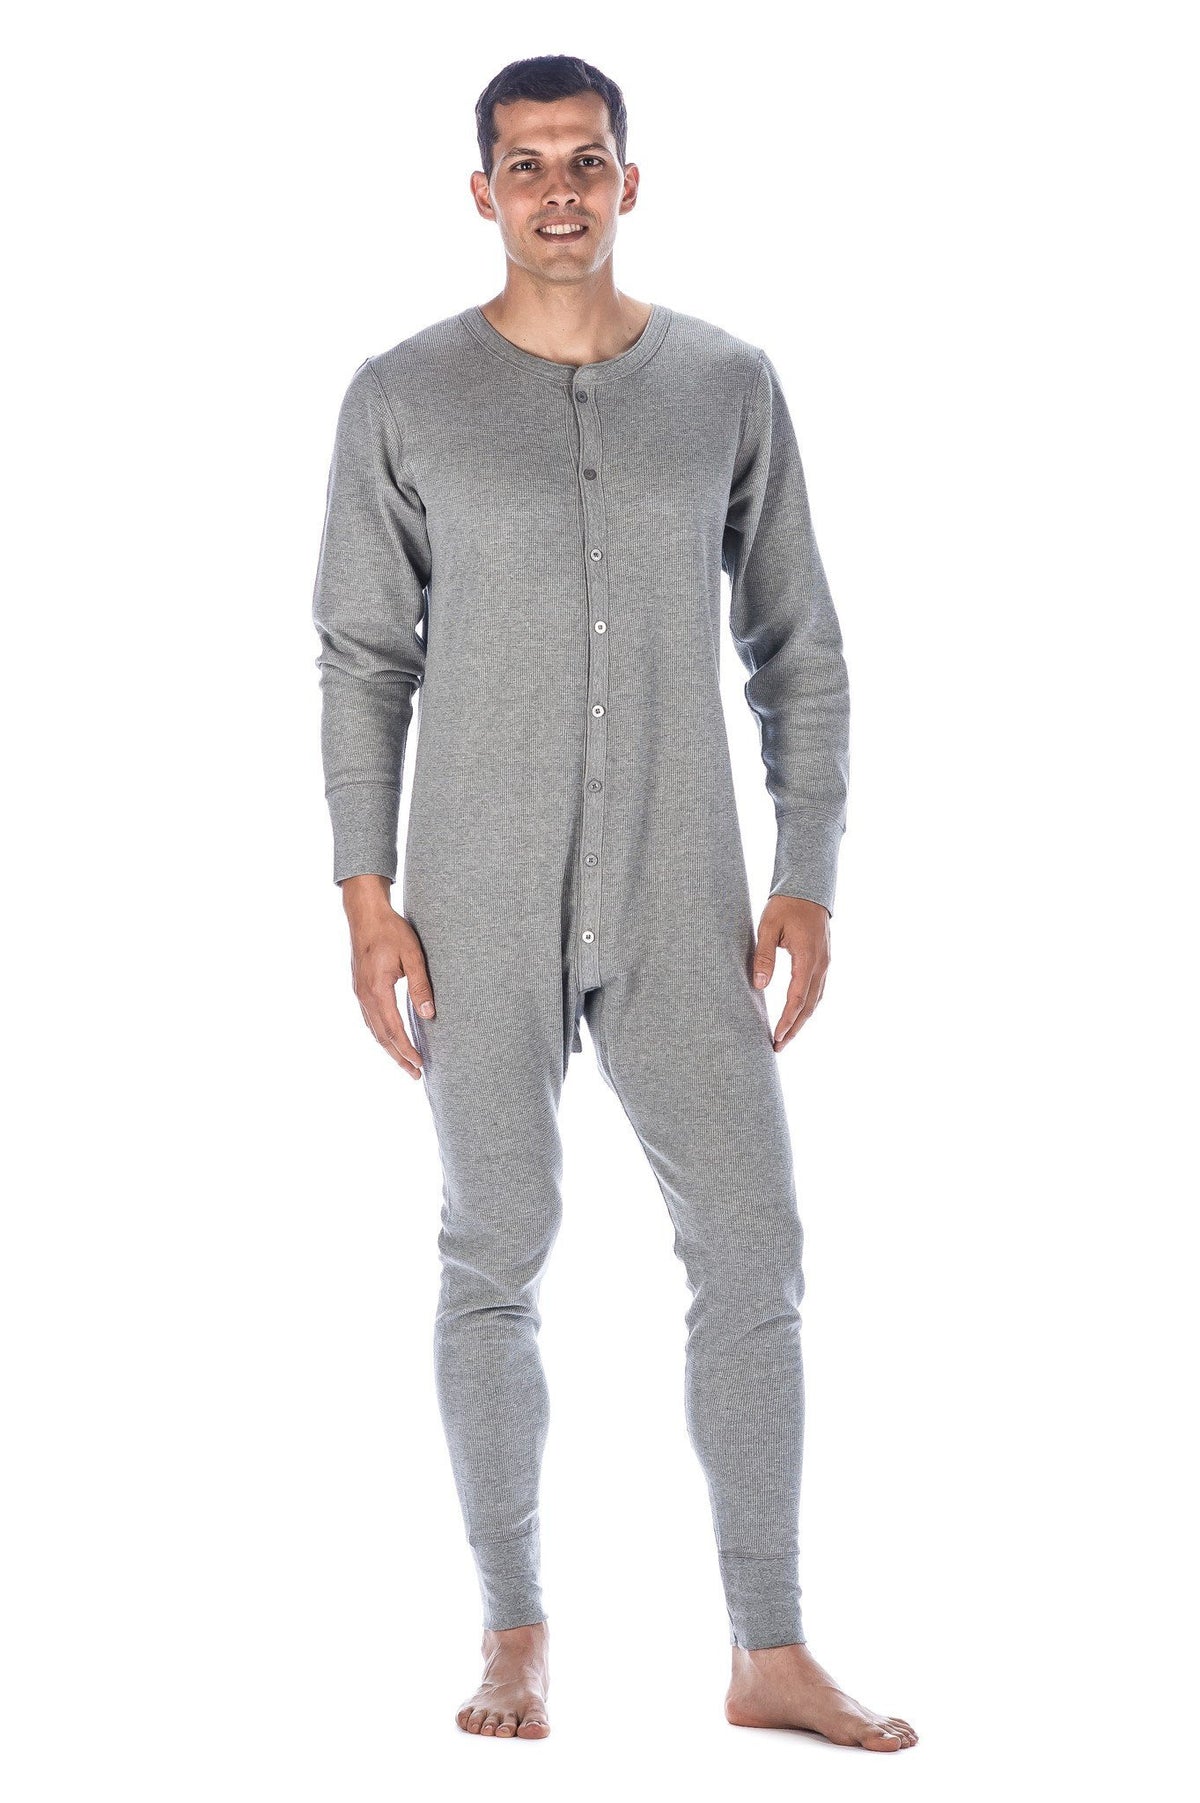 Men's Waffle Knit Thermal Union Suit - Heather Grey